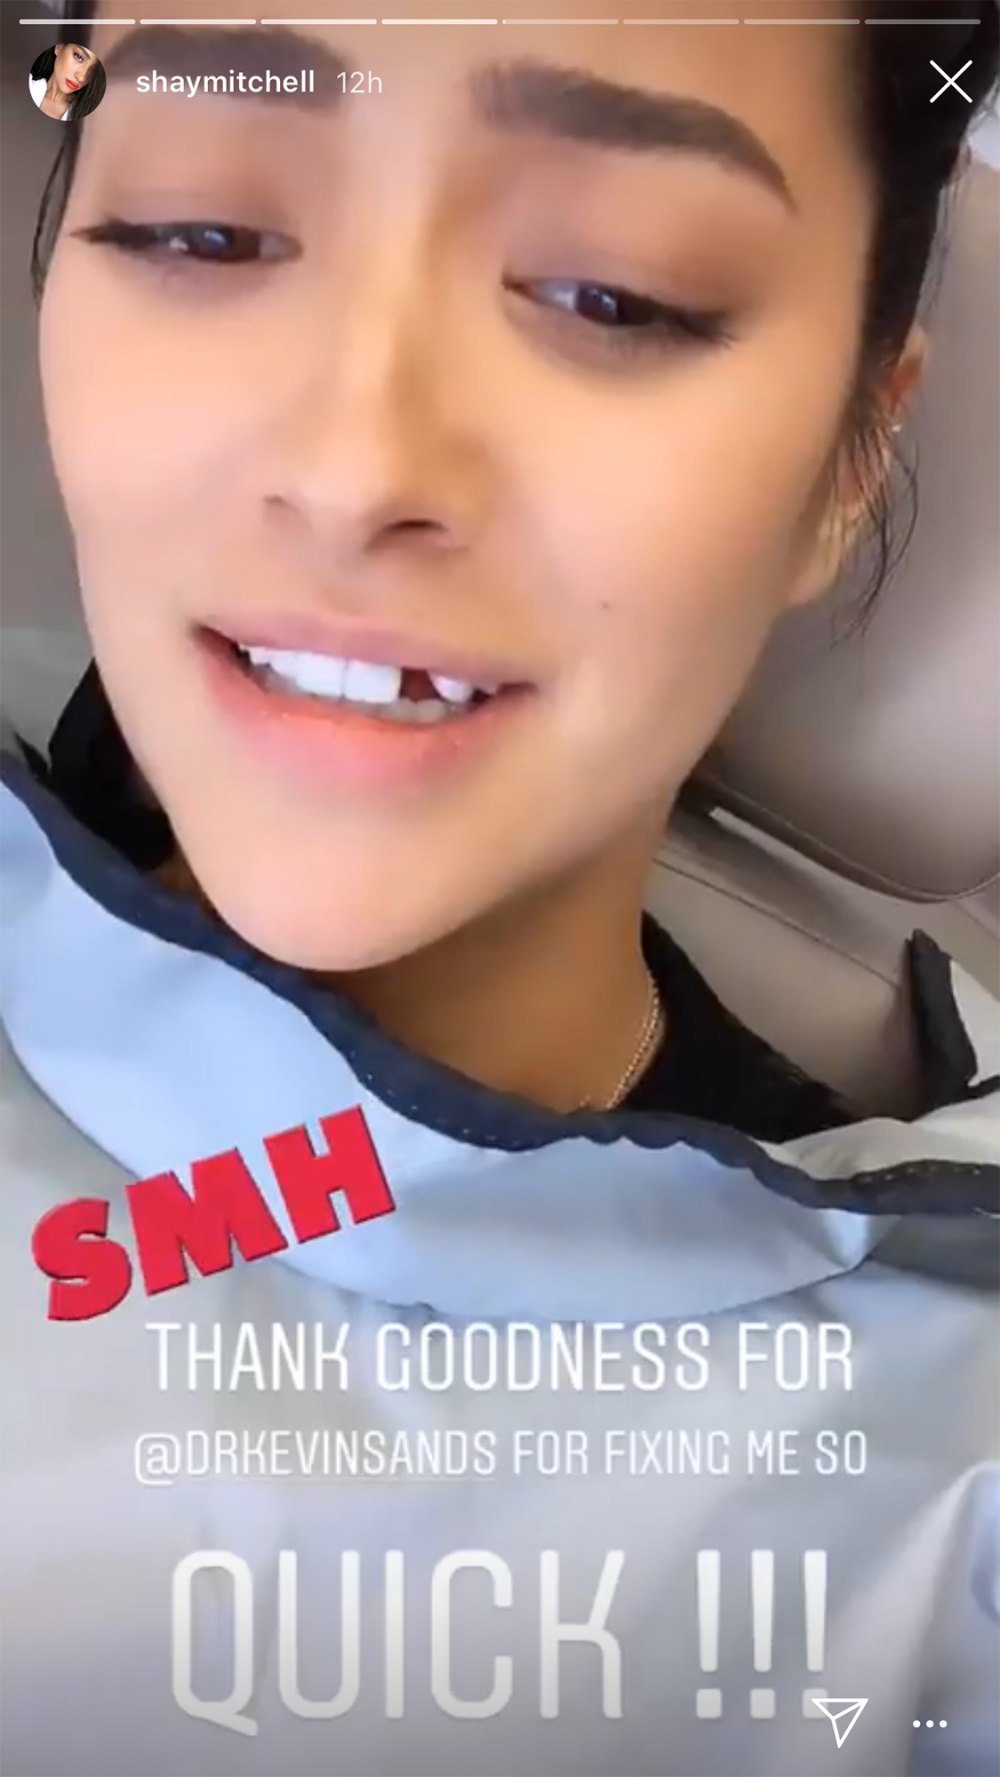 Shay Mitchell Loses a Tooth